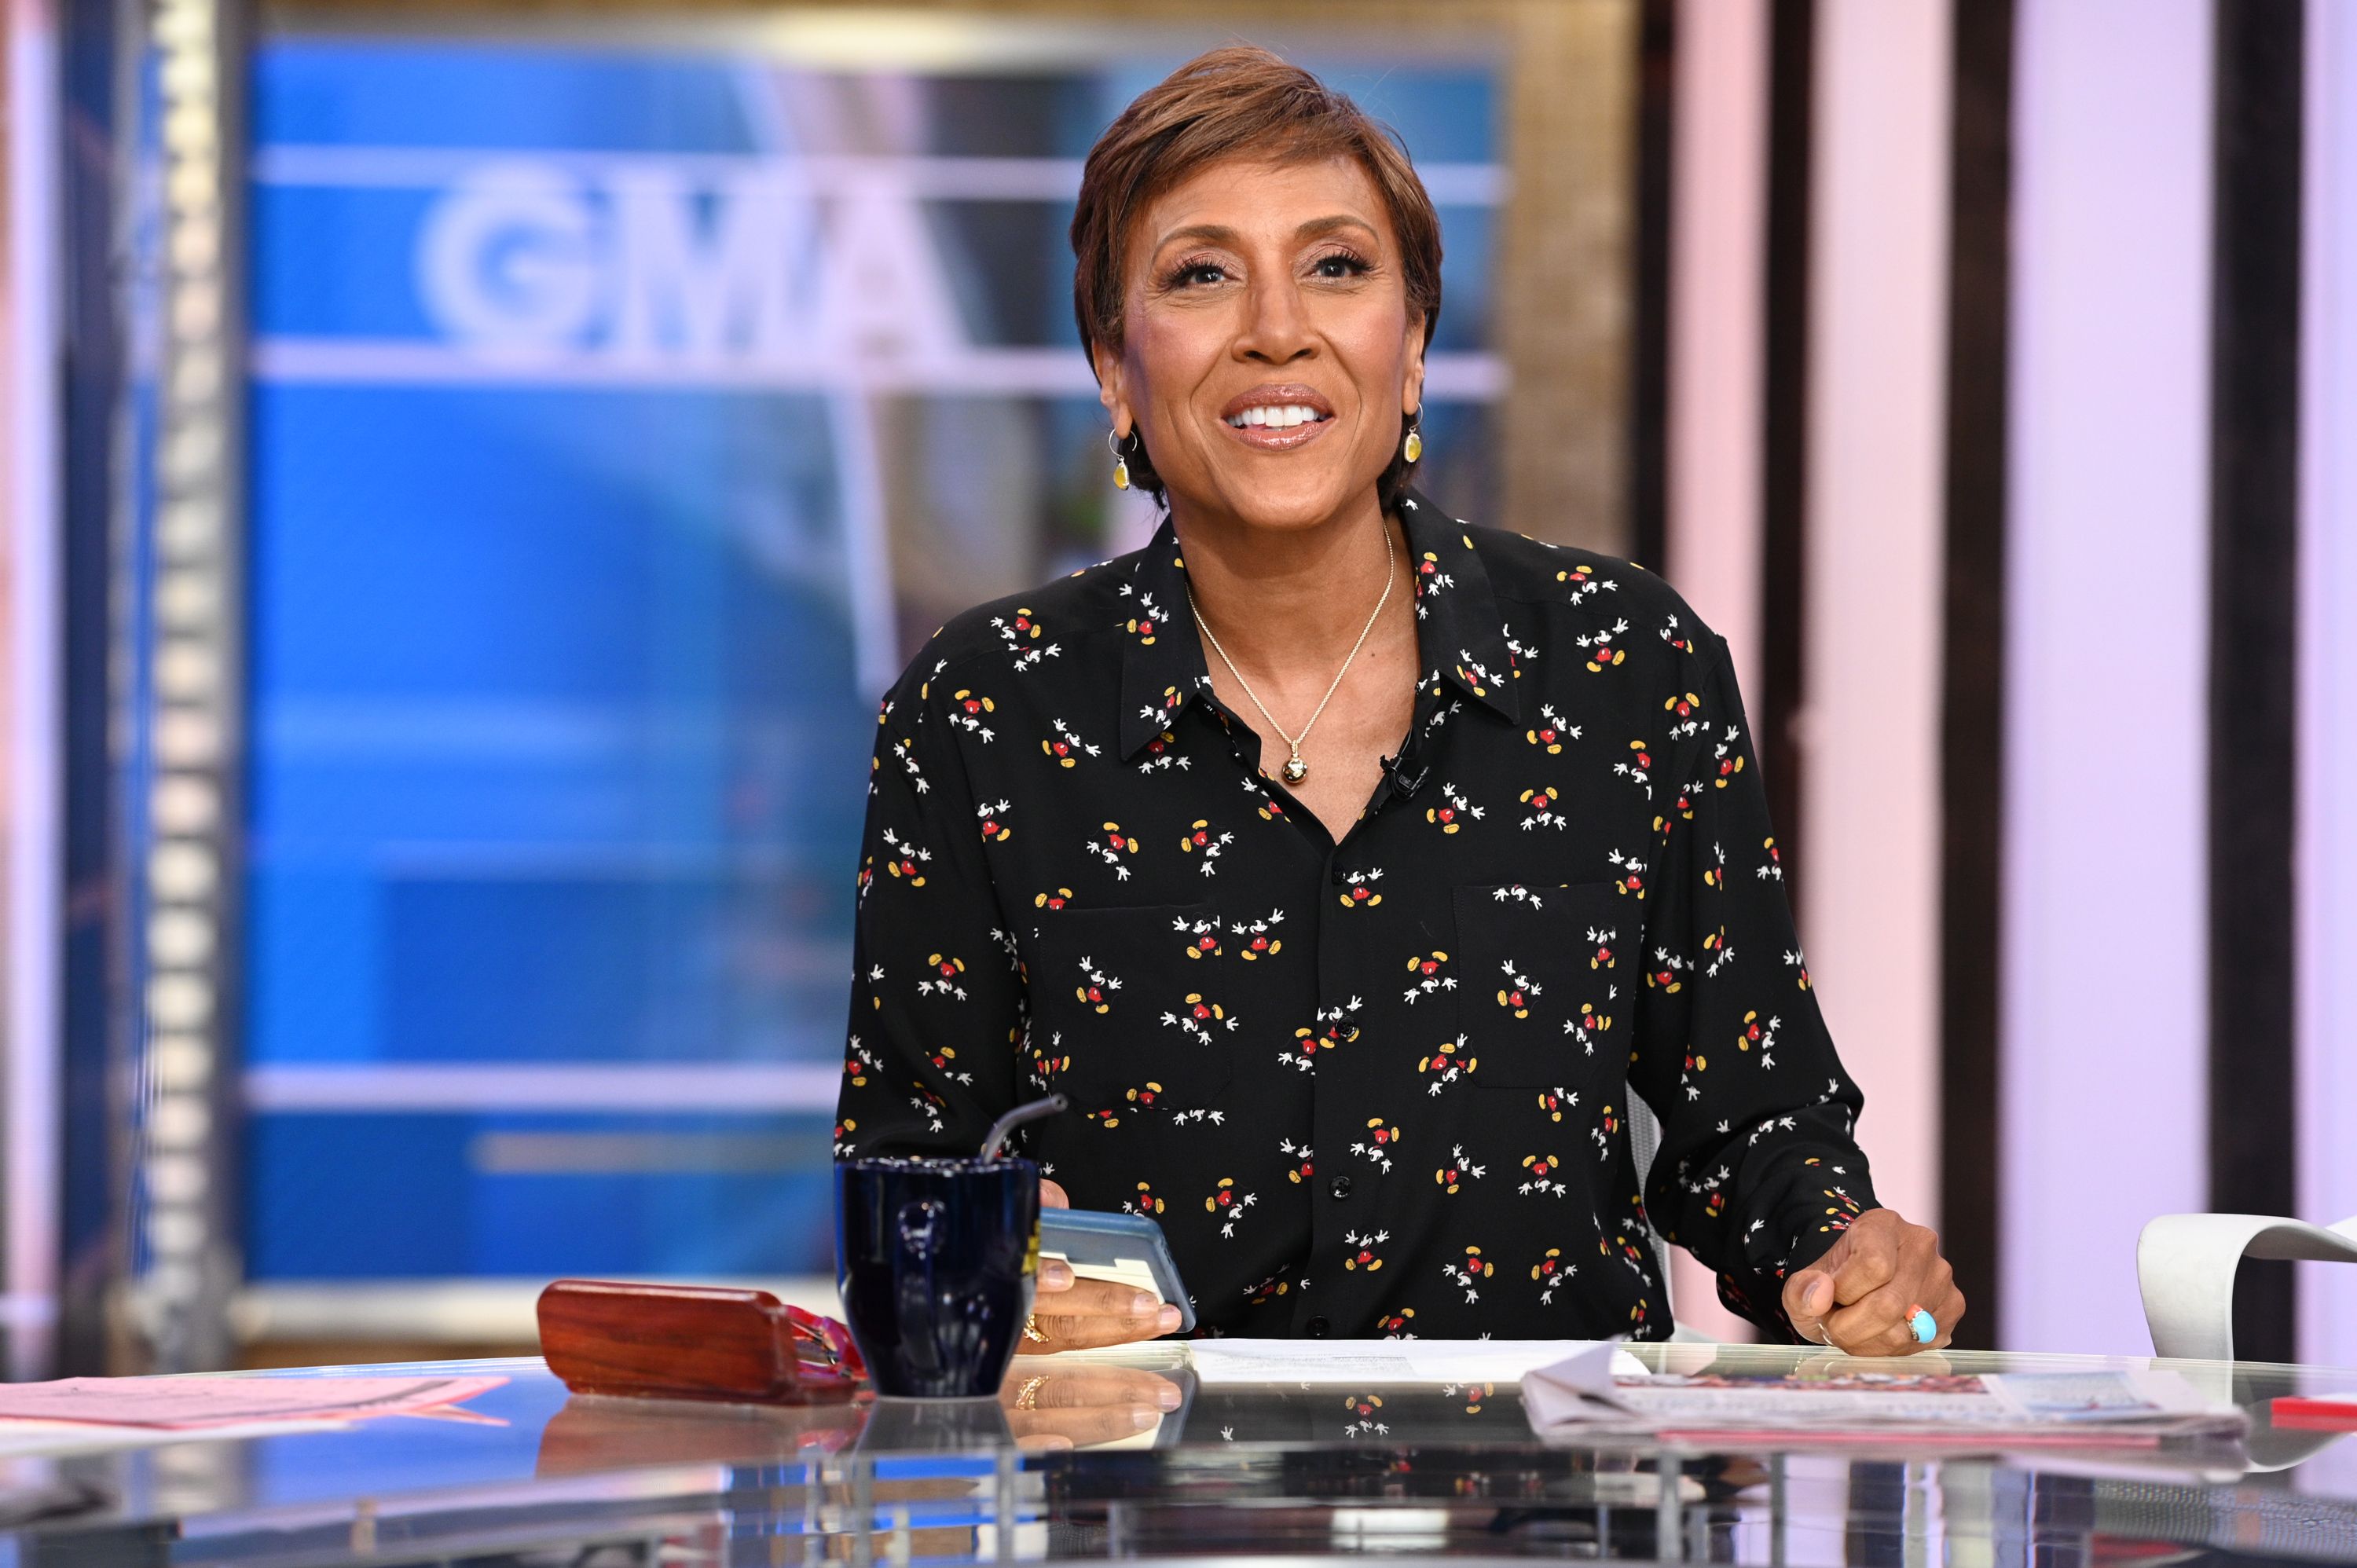 Robin Roberts on the set of "Good Morning America" | Source: Getty Images